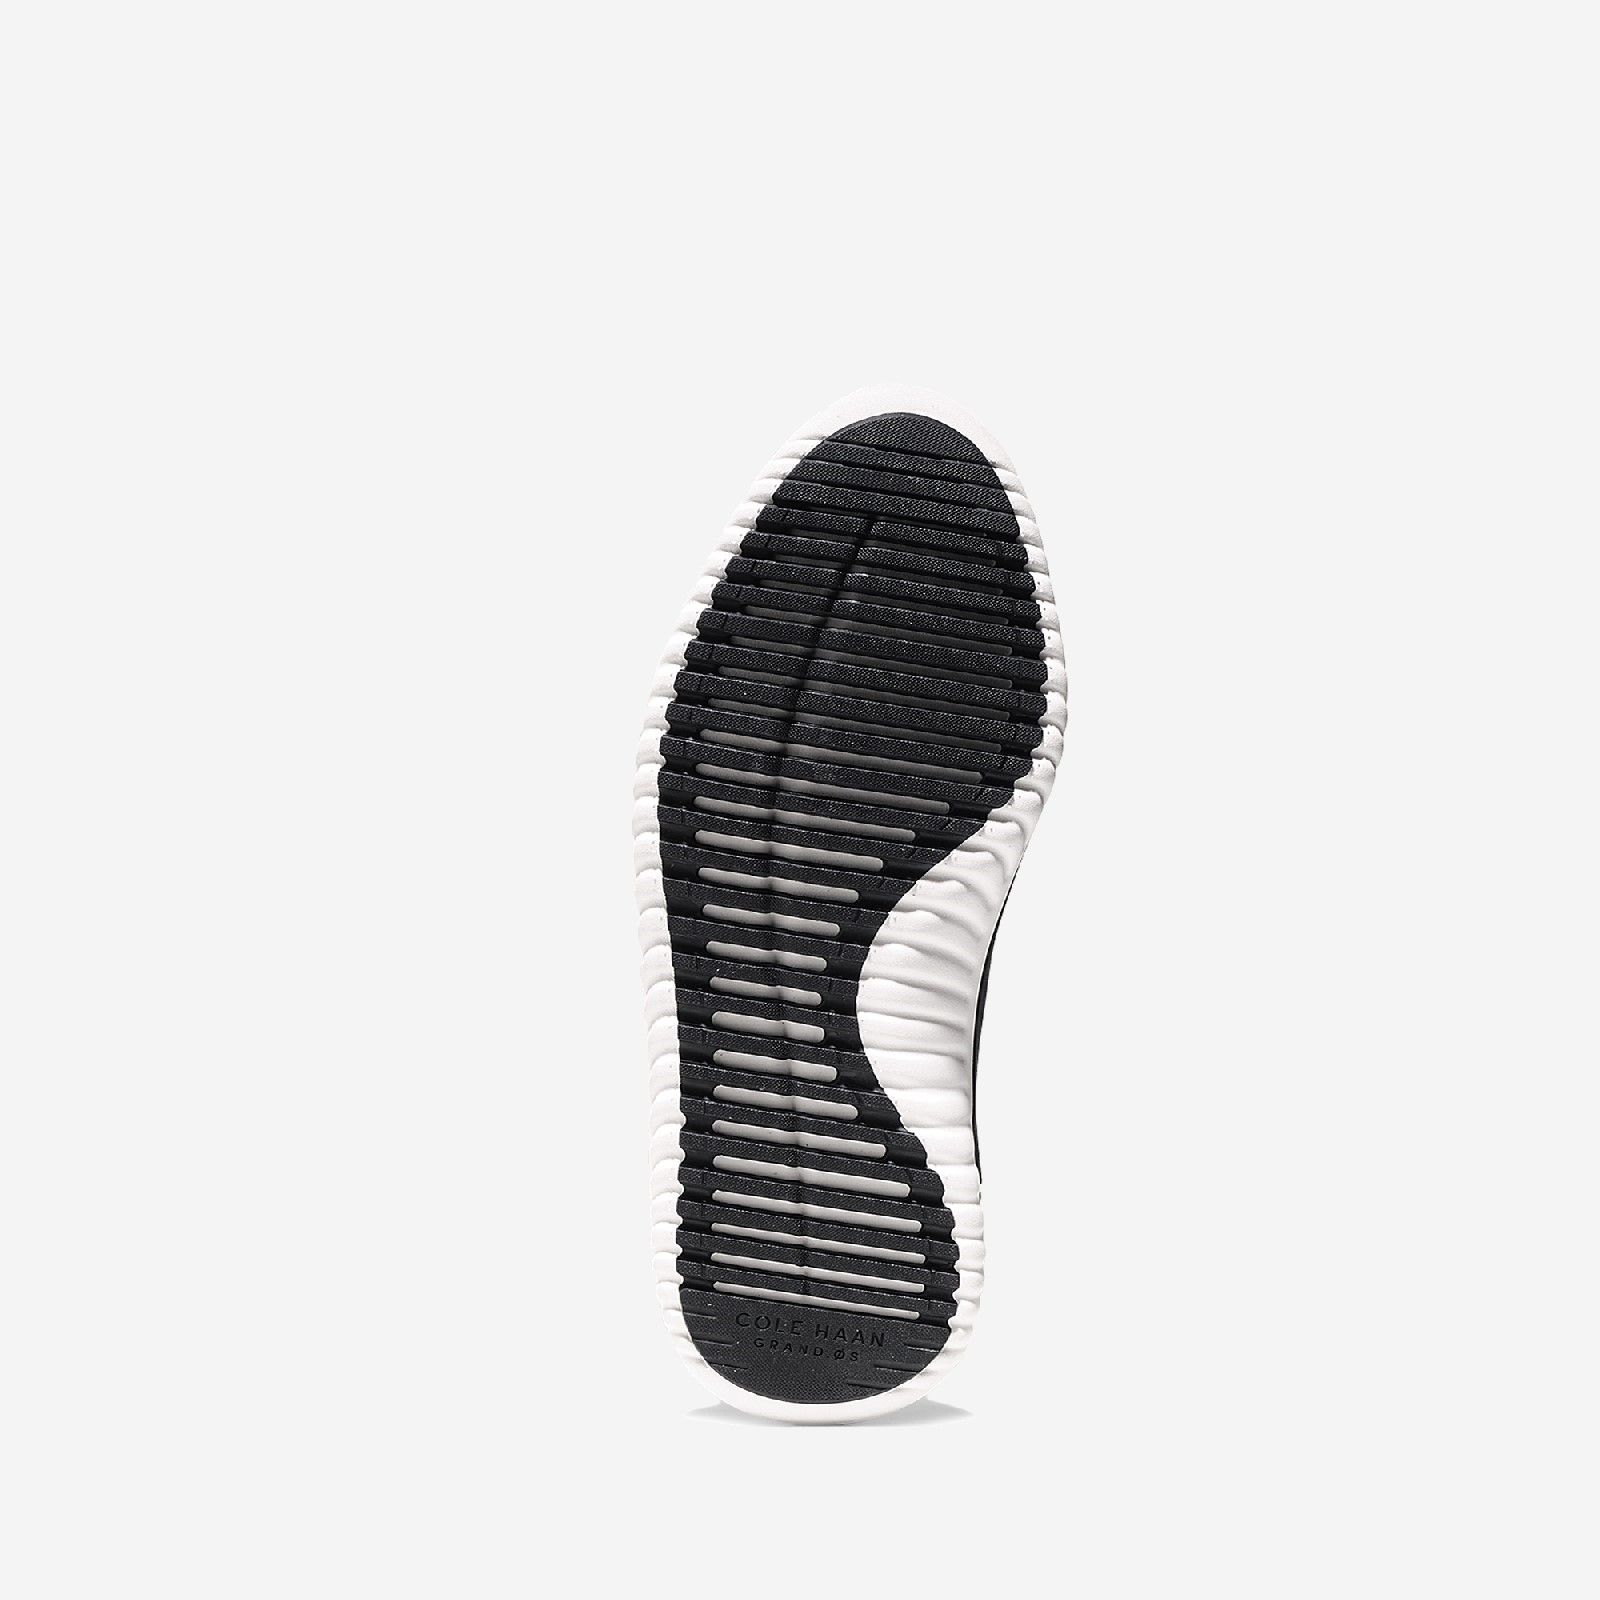 The StudioGrand Knit Sneaker gets revamped with the StudioGrand Sport Knit Sneaker. These clean, lightweight sneakers offer a low-profile silhouette and crisscross elastic upper for a unique spin on classic athleisure. Lightweight.